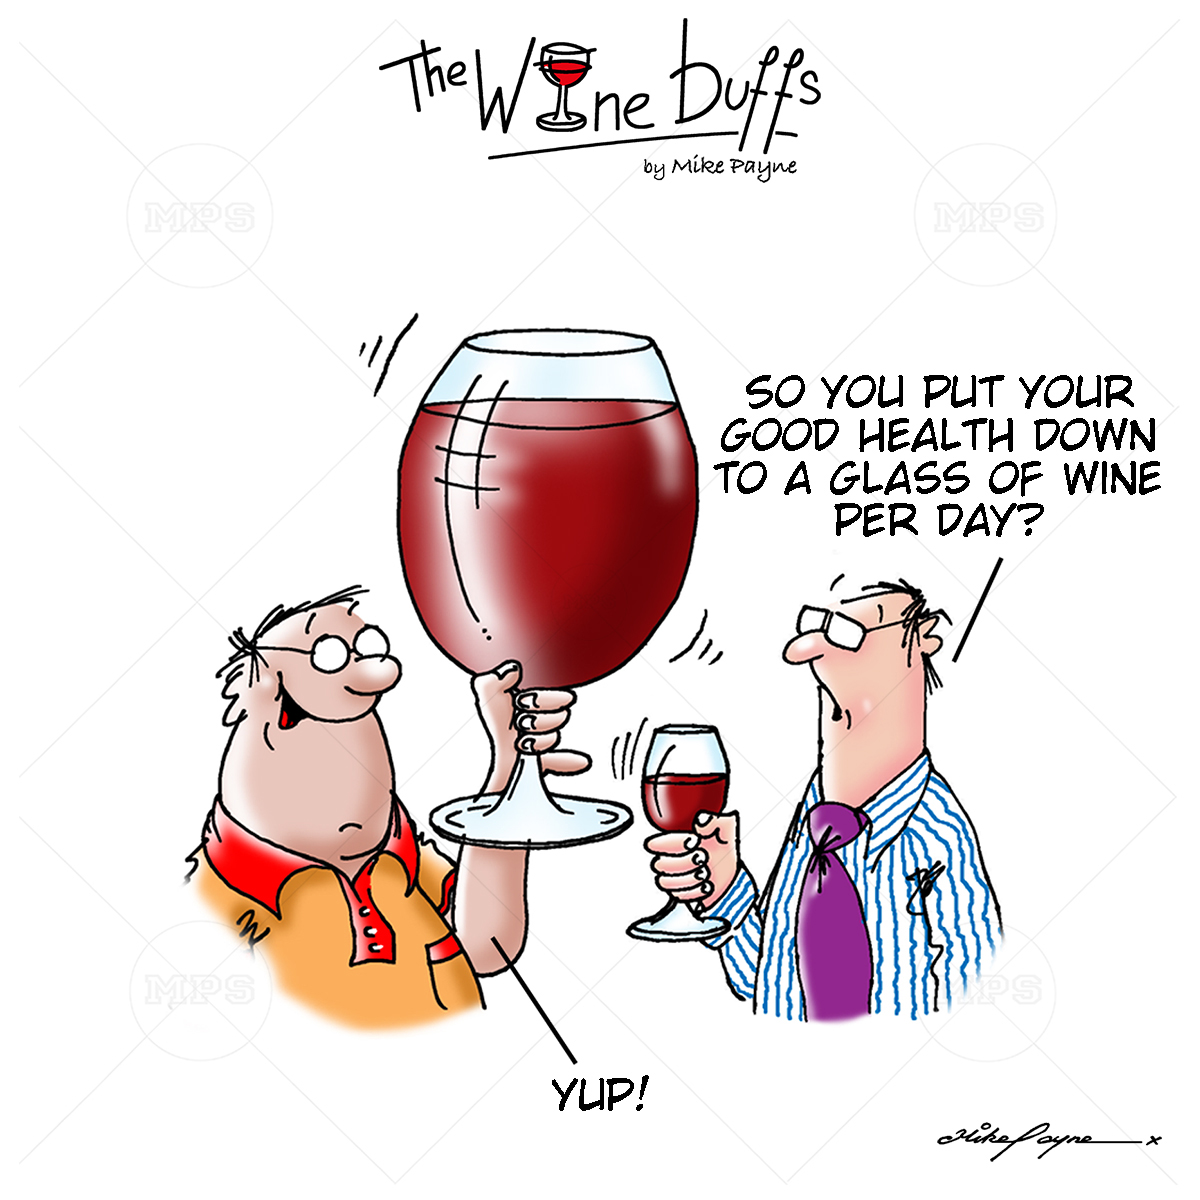 Wine Buffs Cartoon 018 by Mike Payne - Special Edition Canvases & Prints